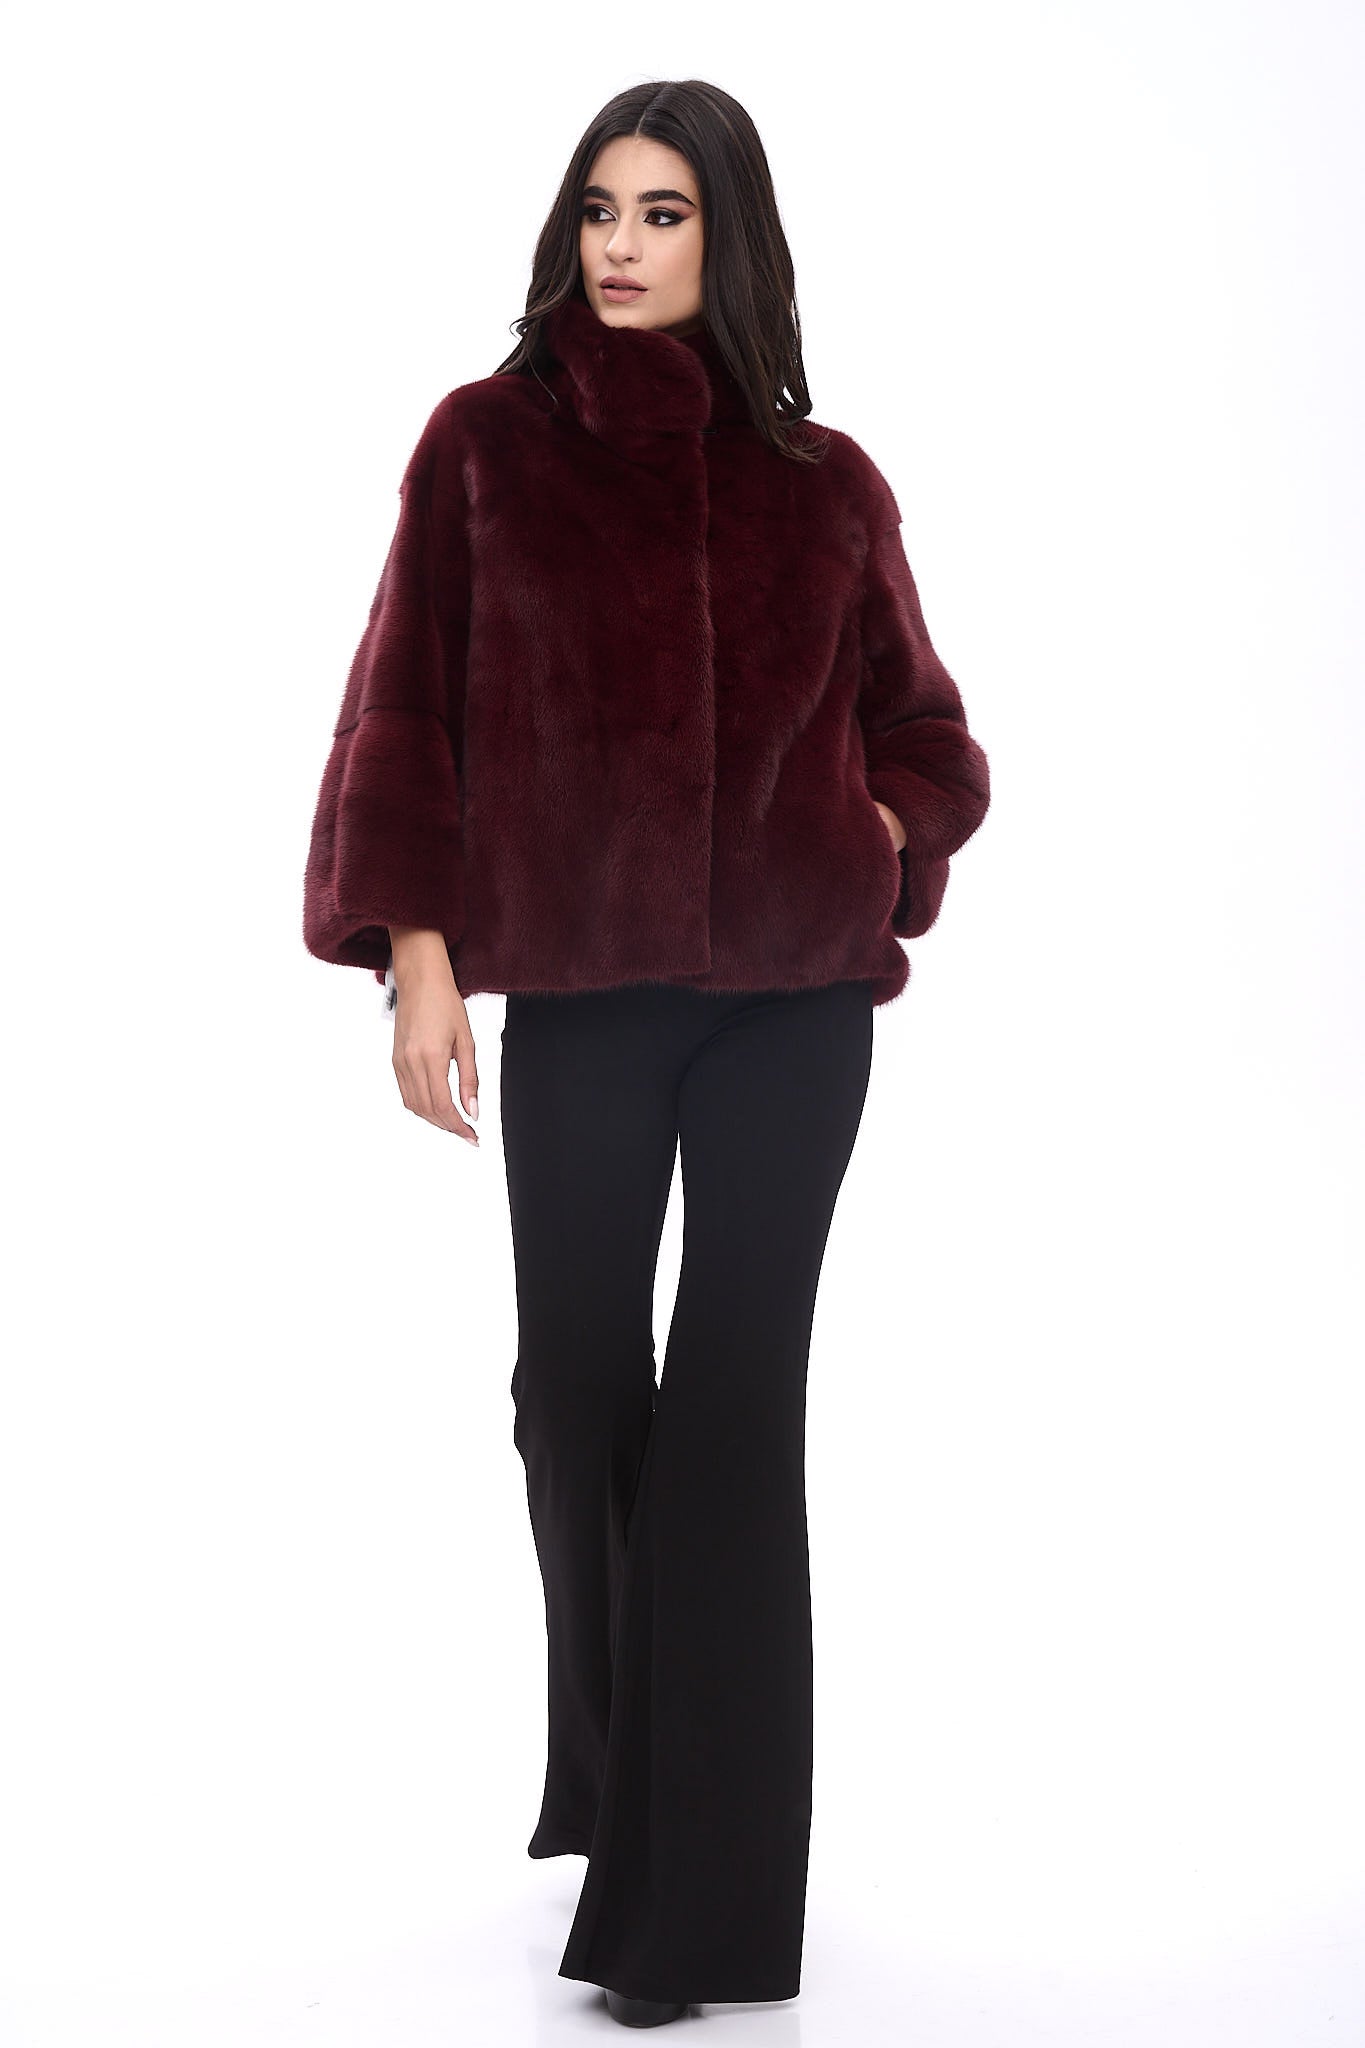 Roomy jacket with bell sleeves